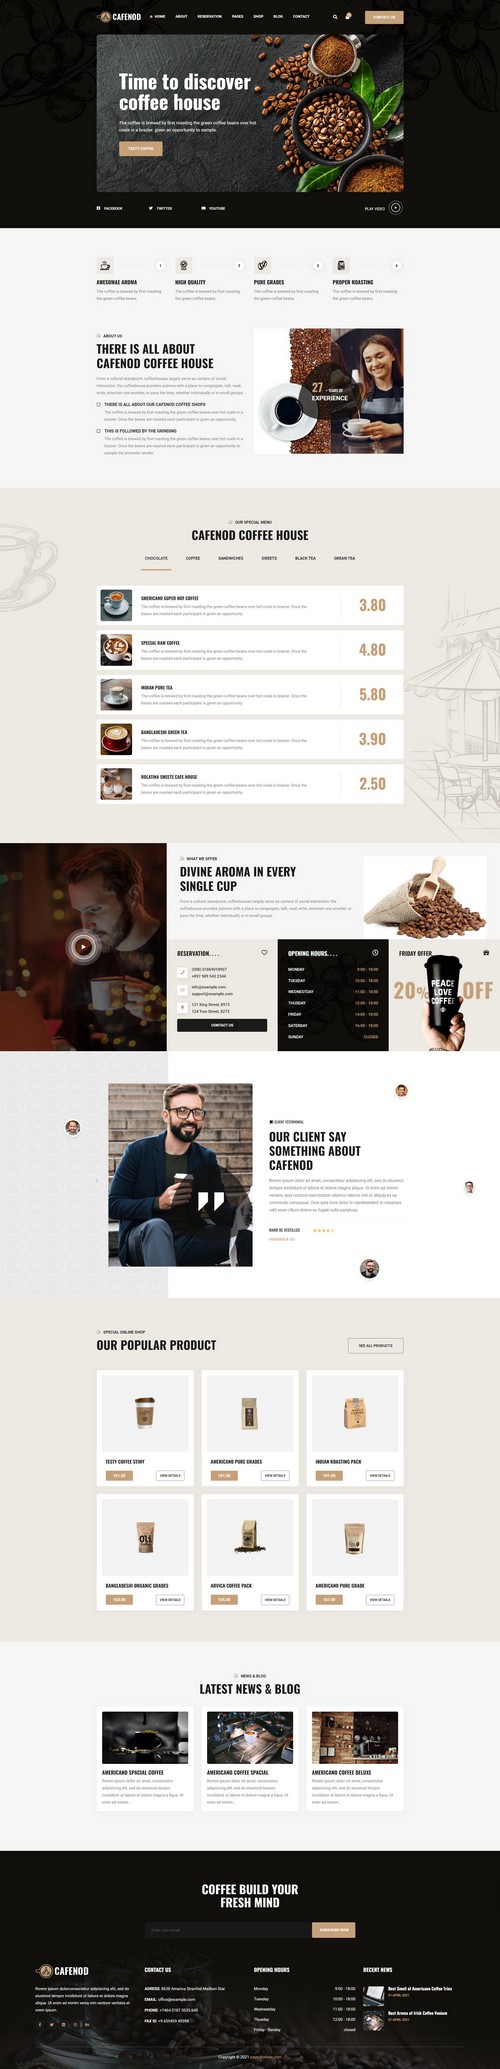 Cafenod - Coffee Shop and Restaurant Joomla Template